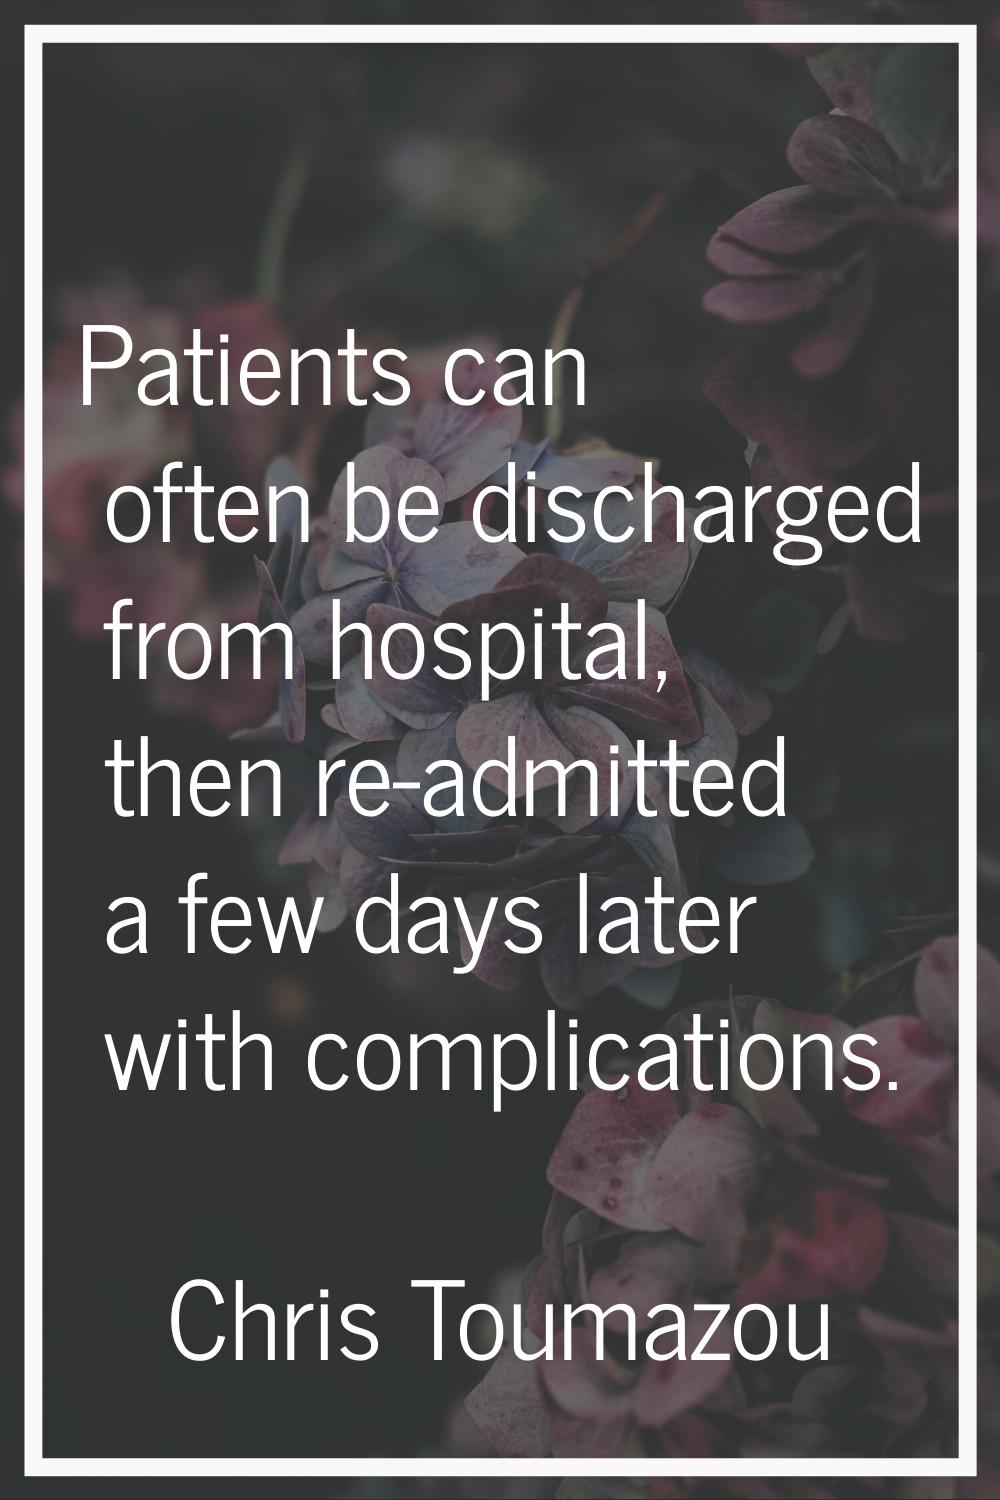 Patients can often be discharged from hospital, then re-admitted a few days later with complication